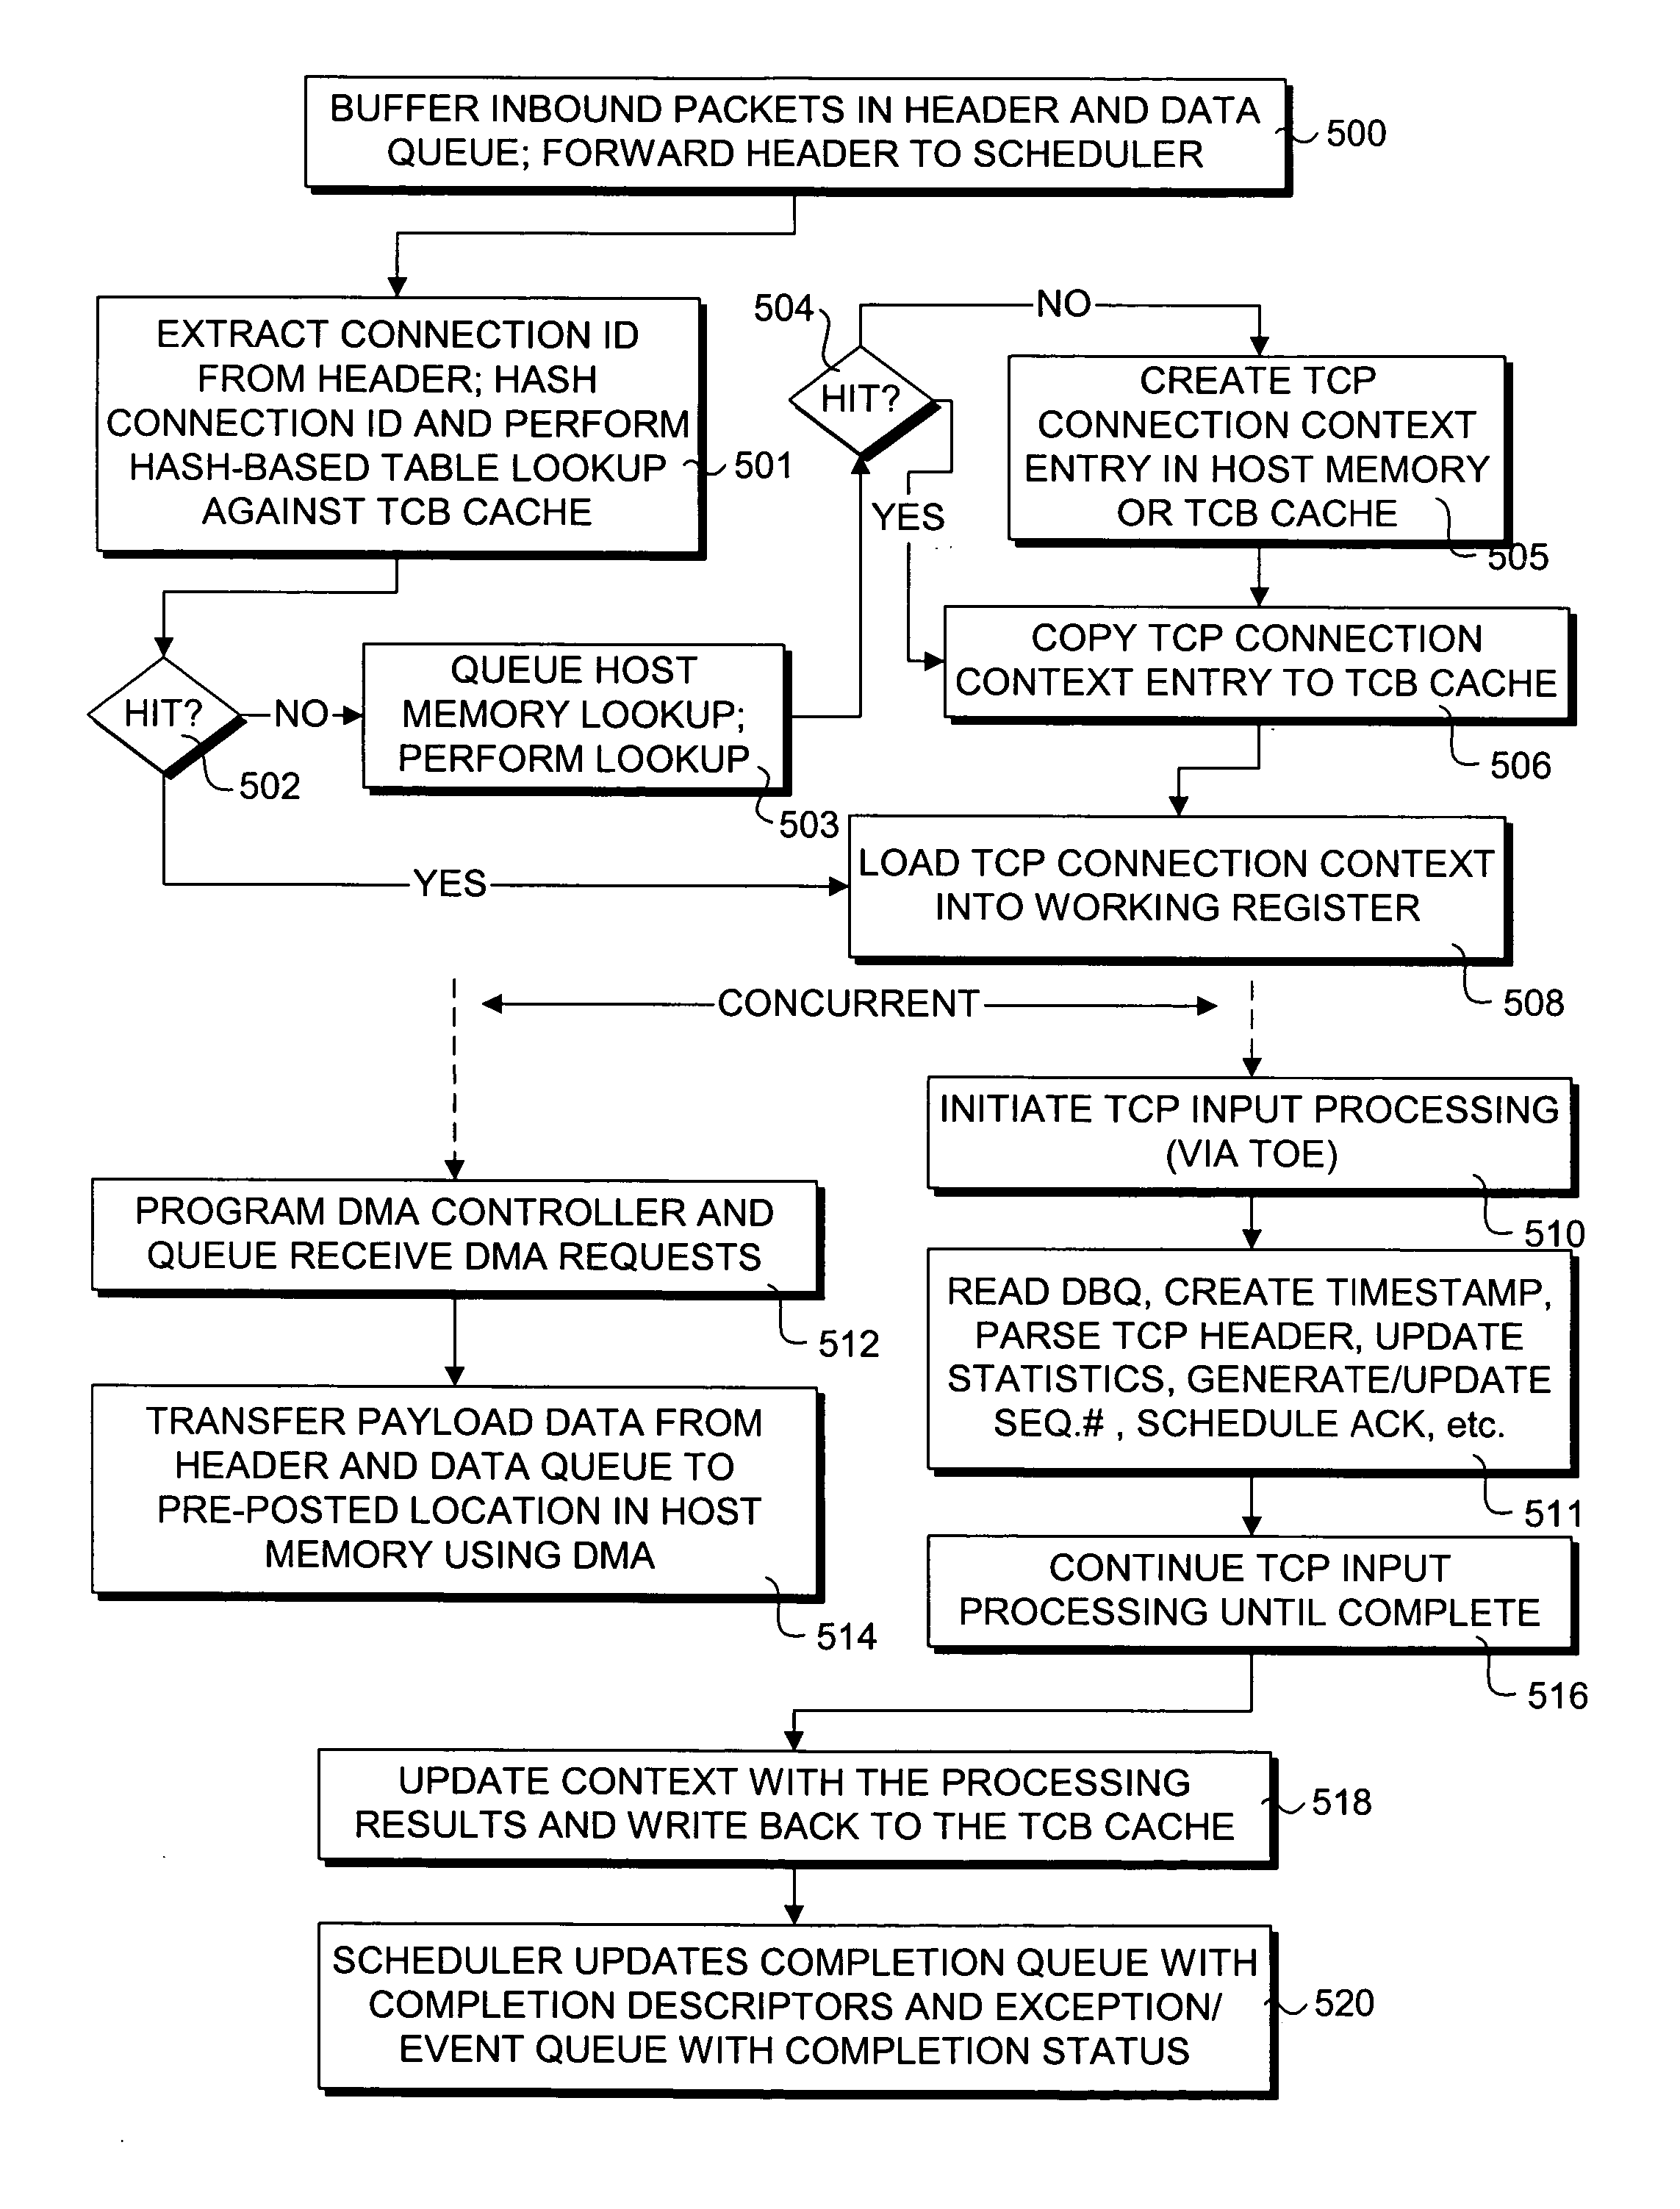 Hardware-based multi-threading for packet processing